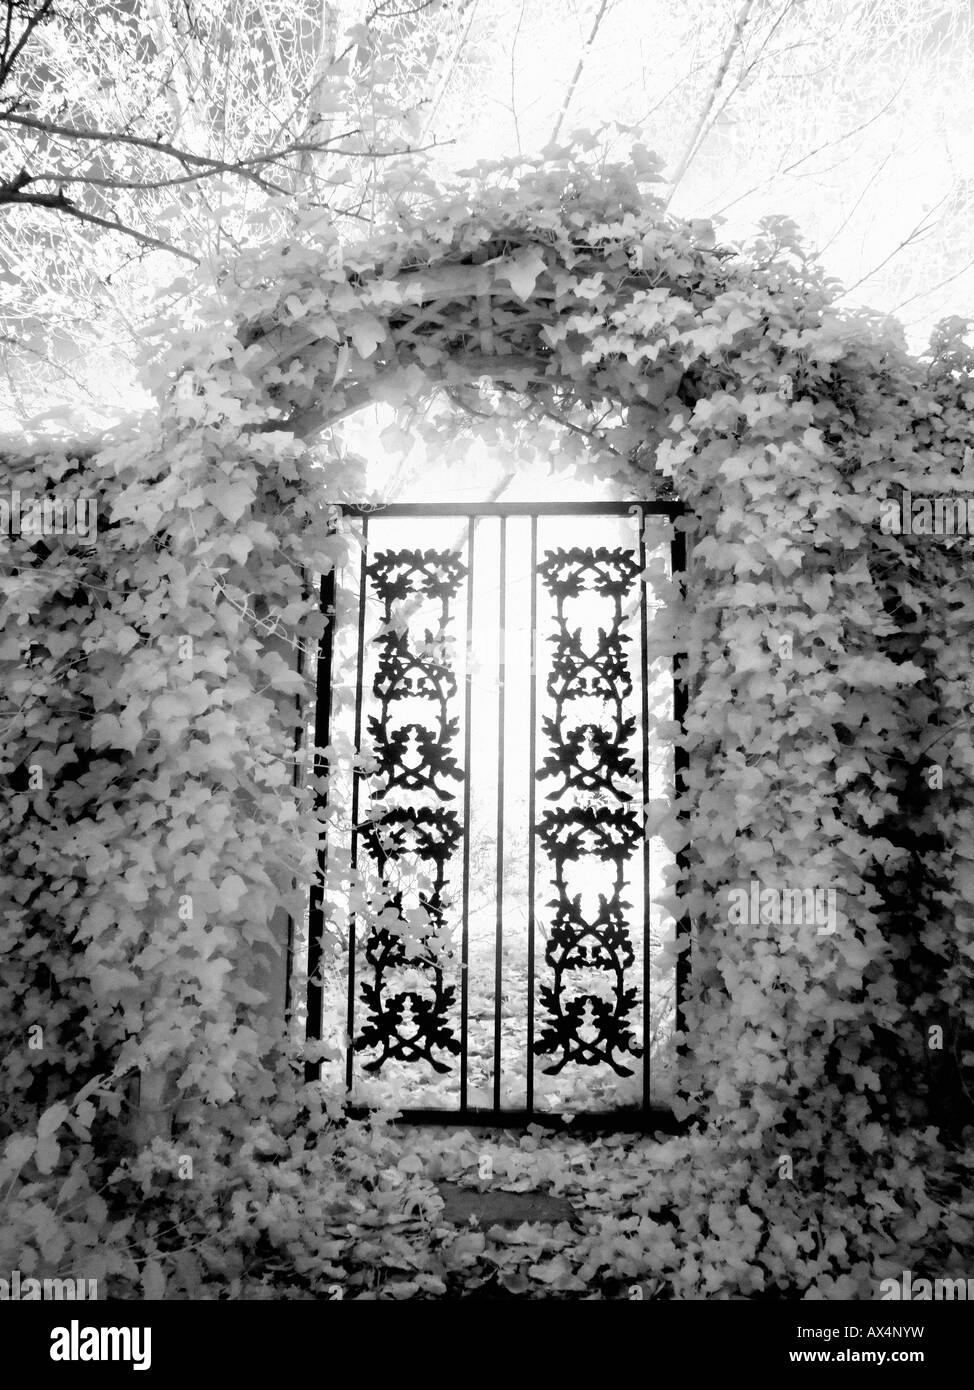 Entrance gate in foliage photographed in infrared Stock Photo